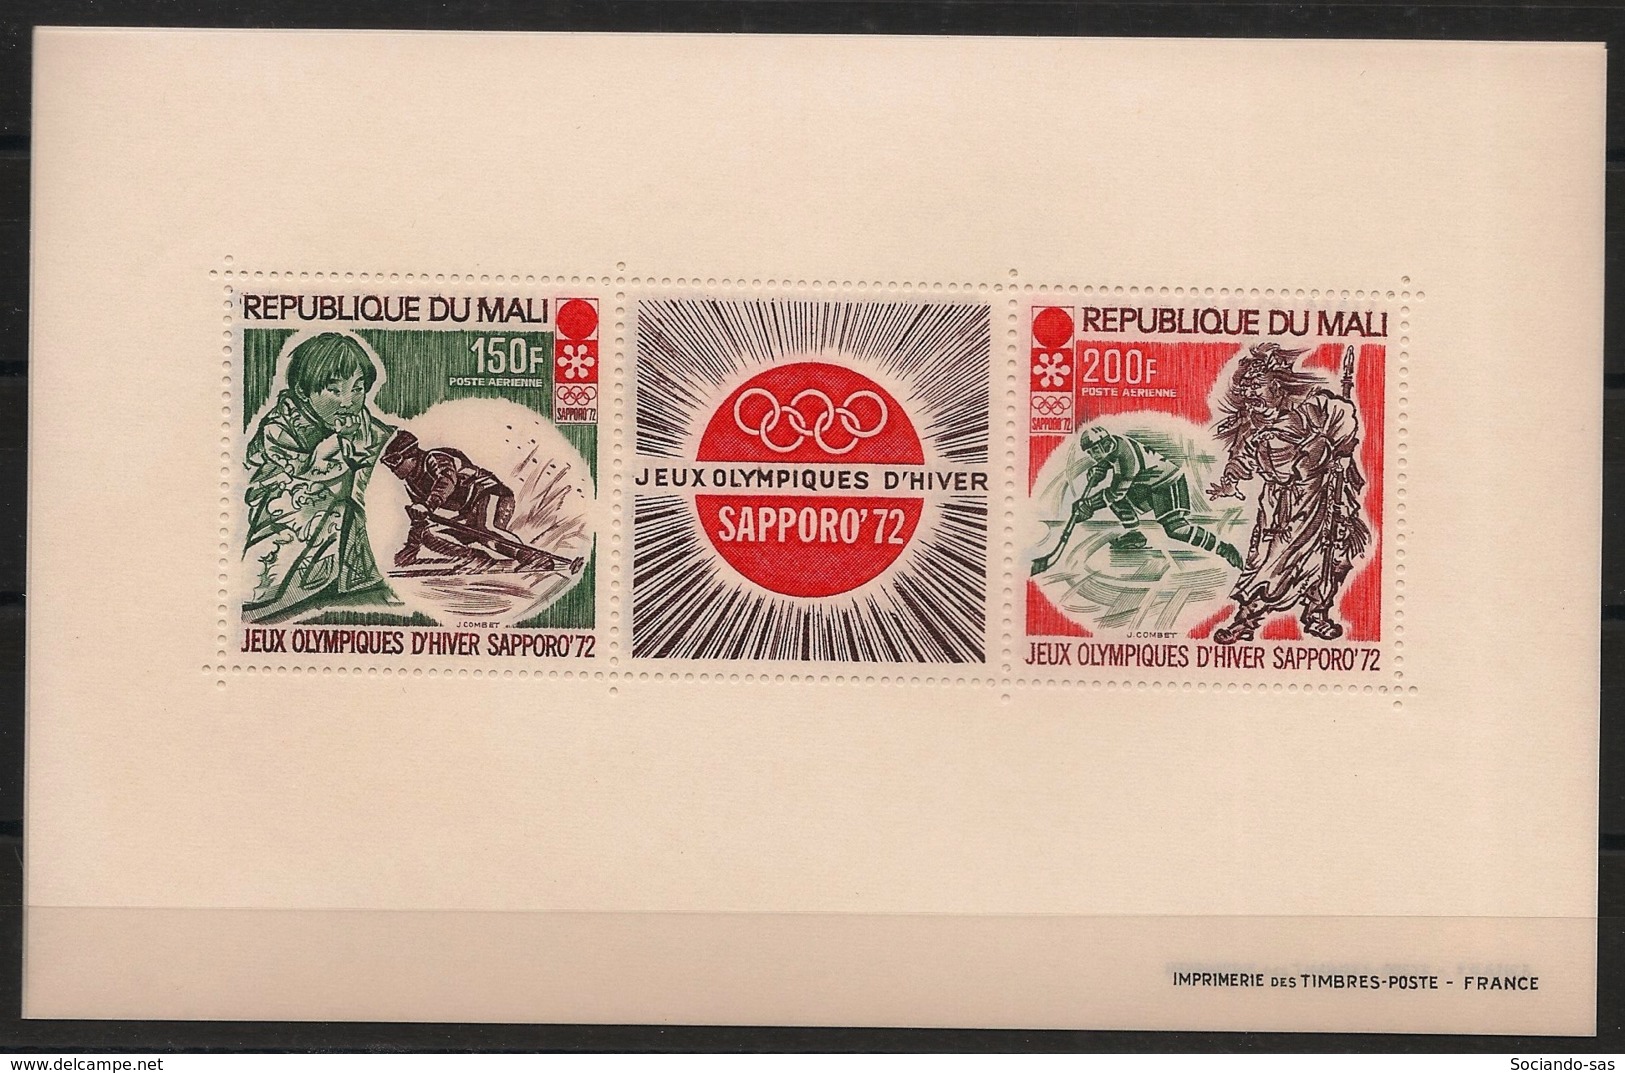 Mali - 1972 - Bloc Feuillet BF N°Yv. 5 - Olympics / Sapporo - Neuf Luxe ** / MNH / Postfrisch - Mali (1959-...)